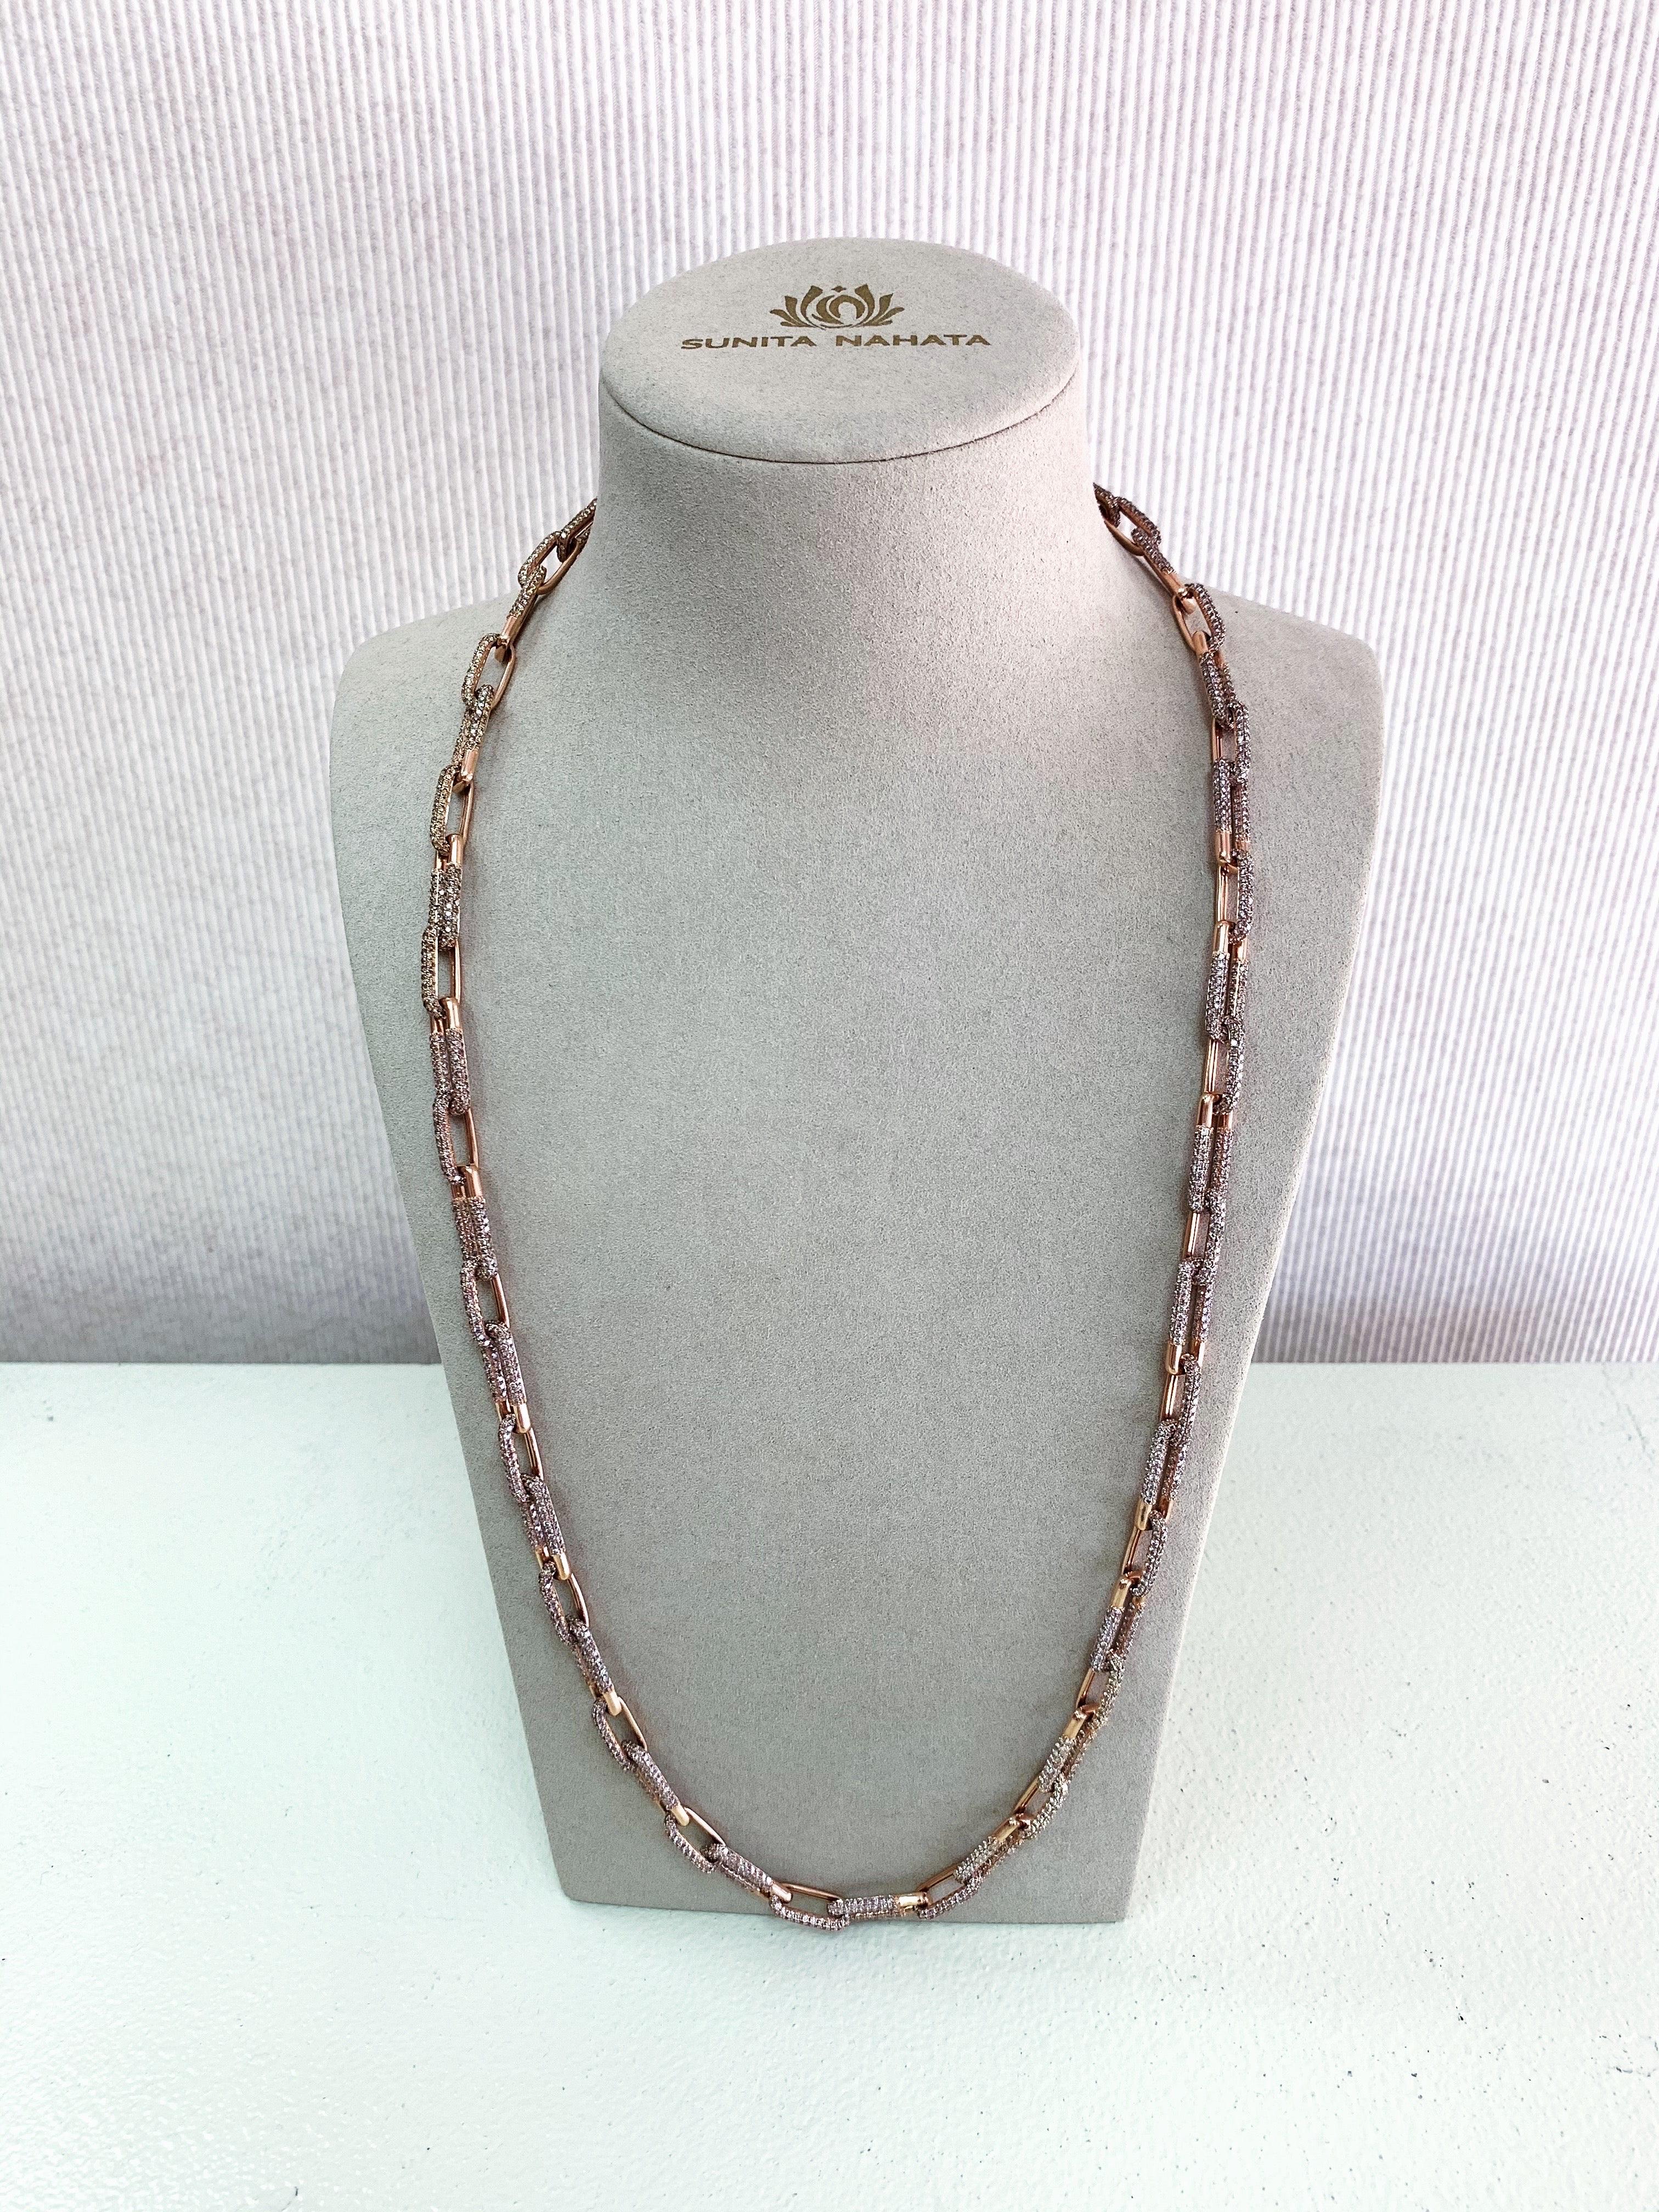 This is a modern diamonds links necklace that is super fun and easy to wear! This piece can be draped as a single layer chain, or styled as a double layer chain and choker. Its simple elegance makes it the perfect accessory for a woman on-the-go!